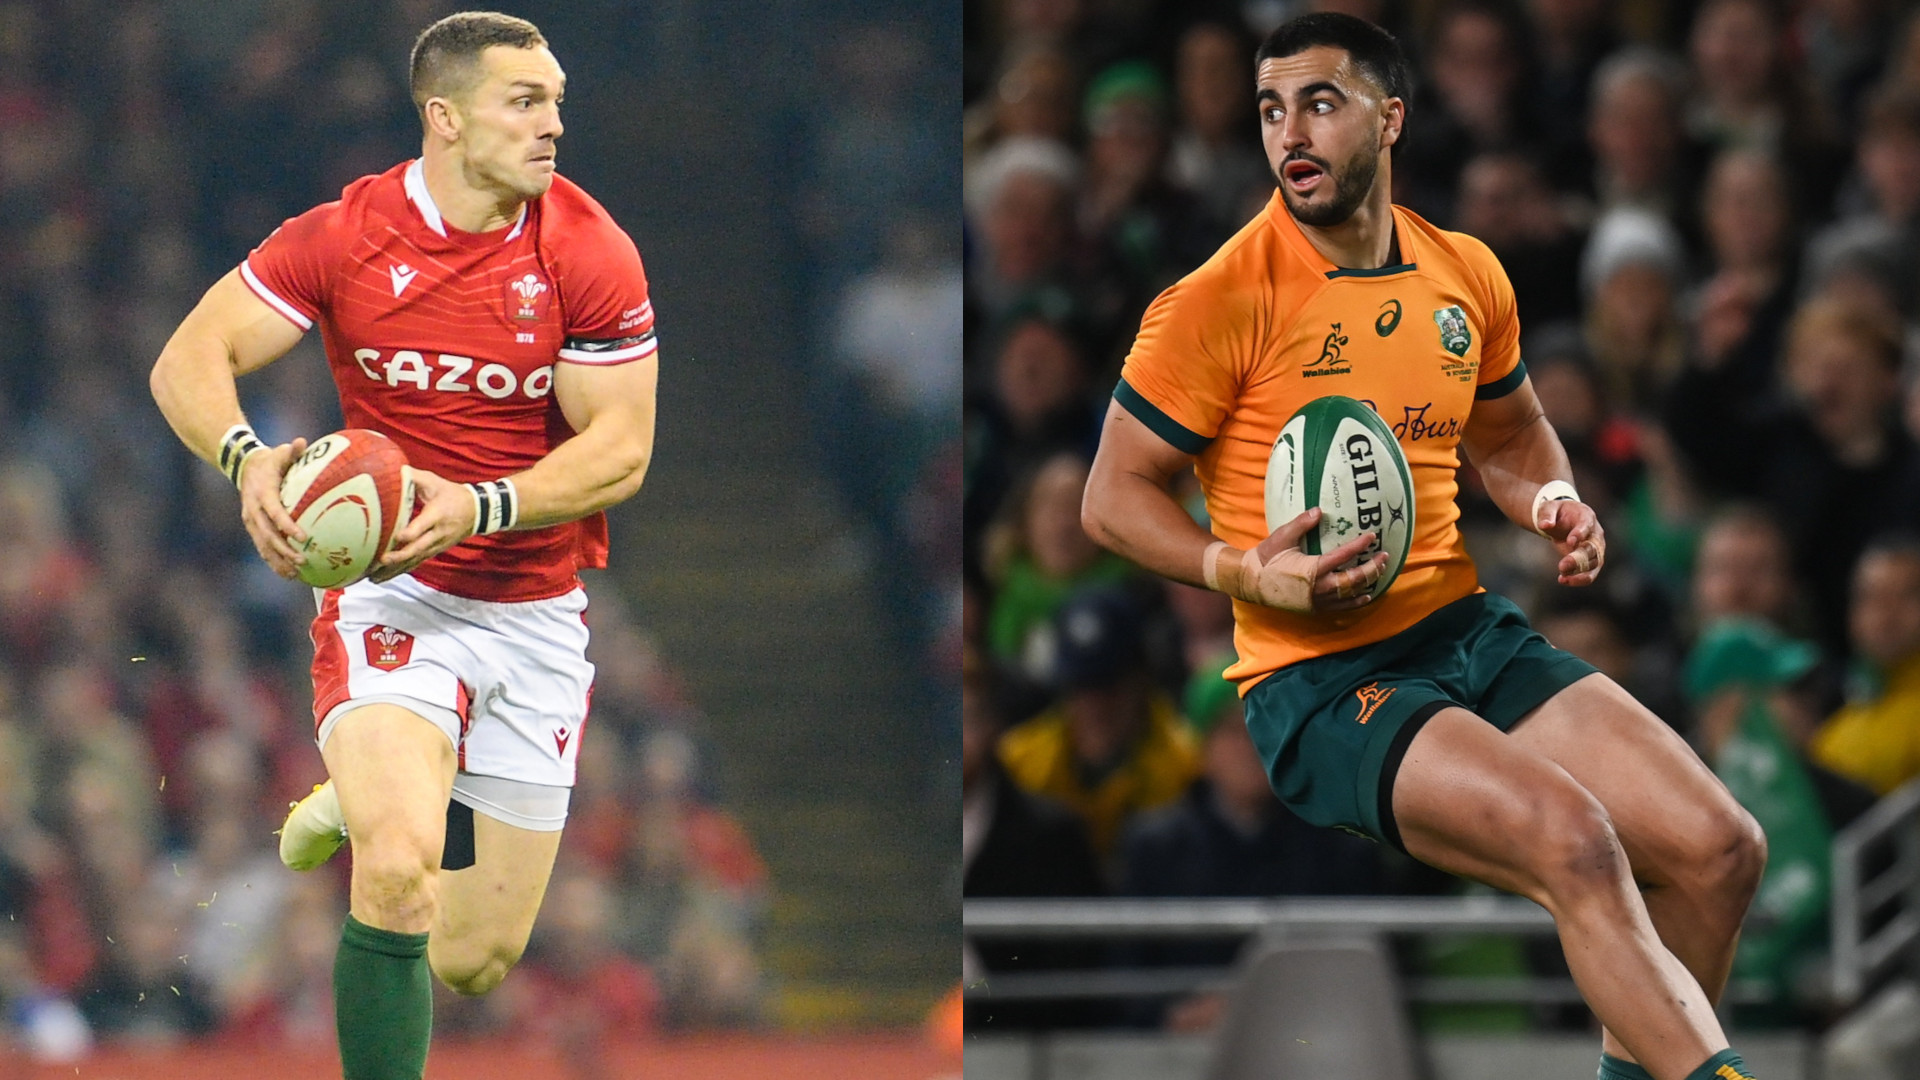 Wales vs Australia live stream how to watch Autumn Nations Series rugby from anywhere today TechRadar